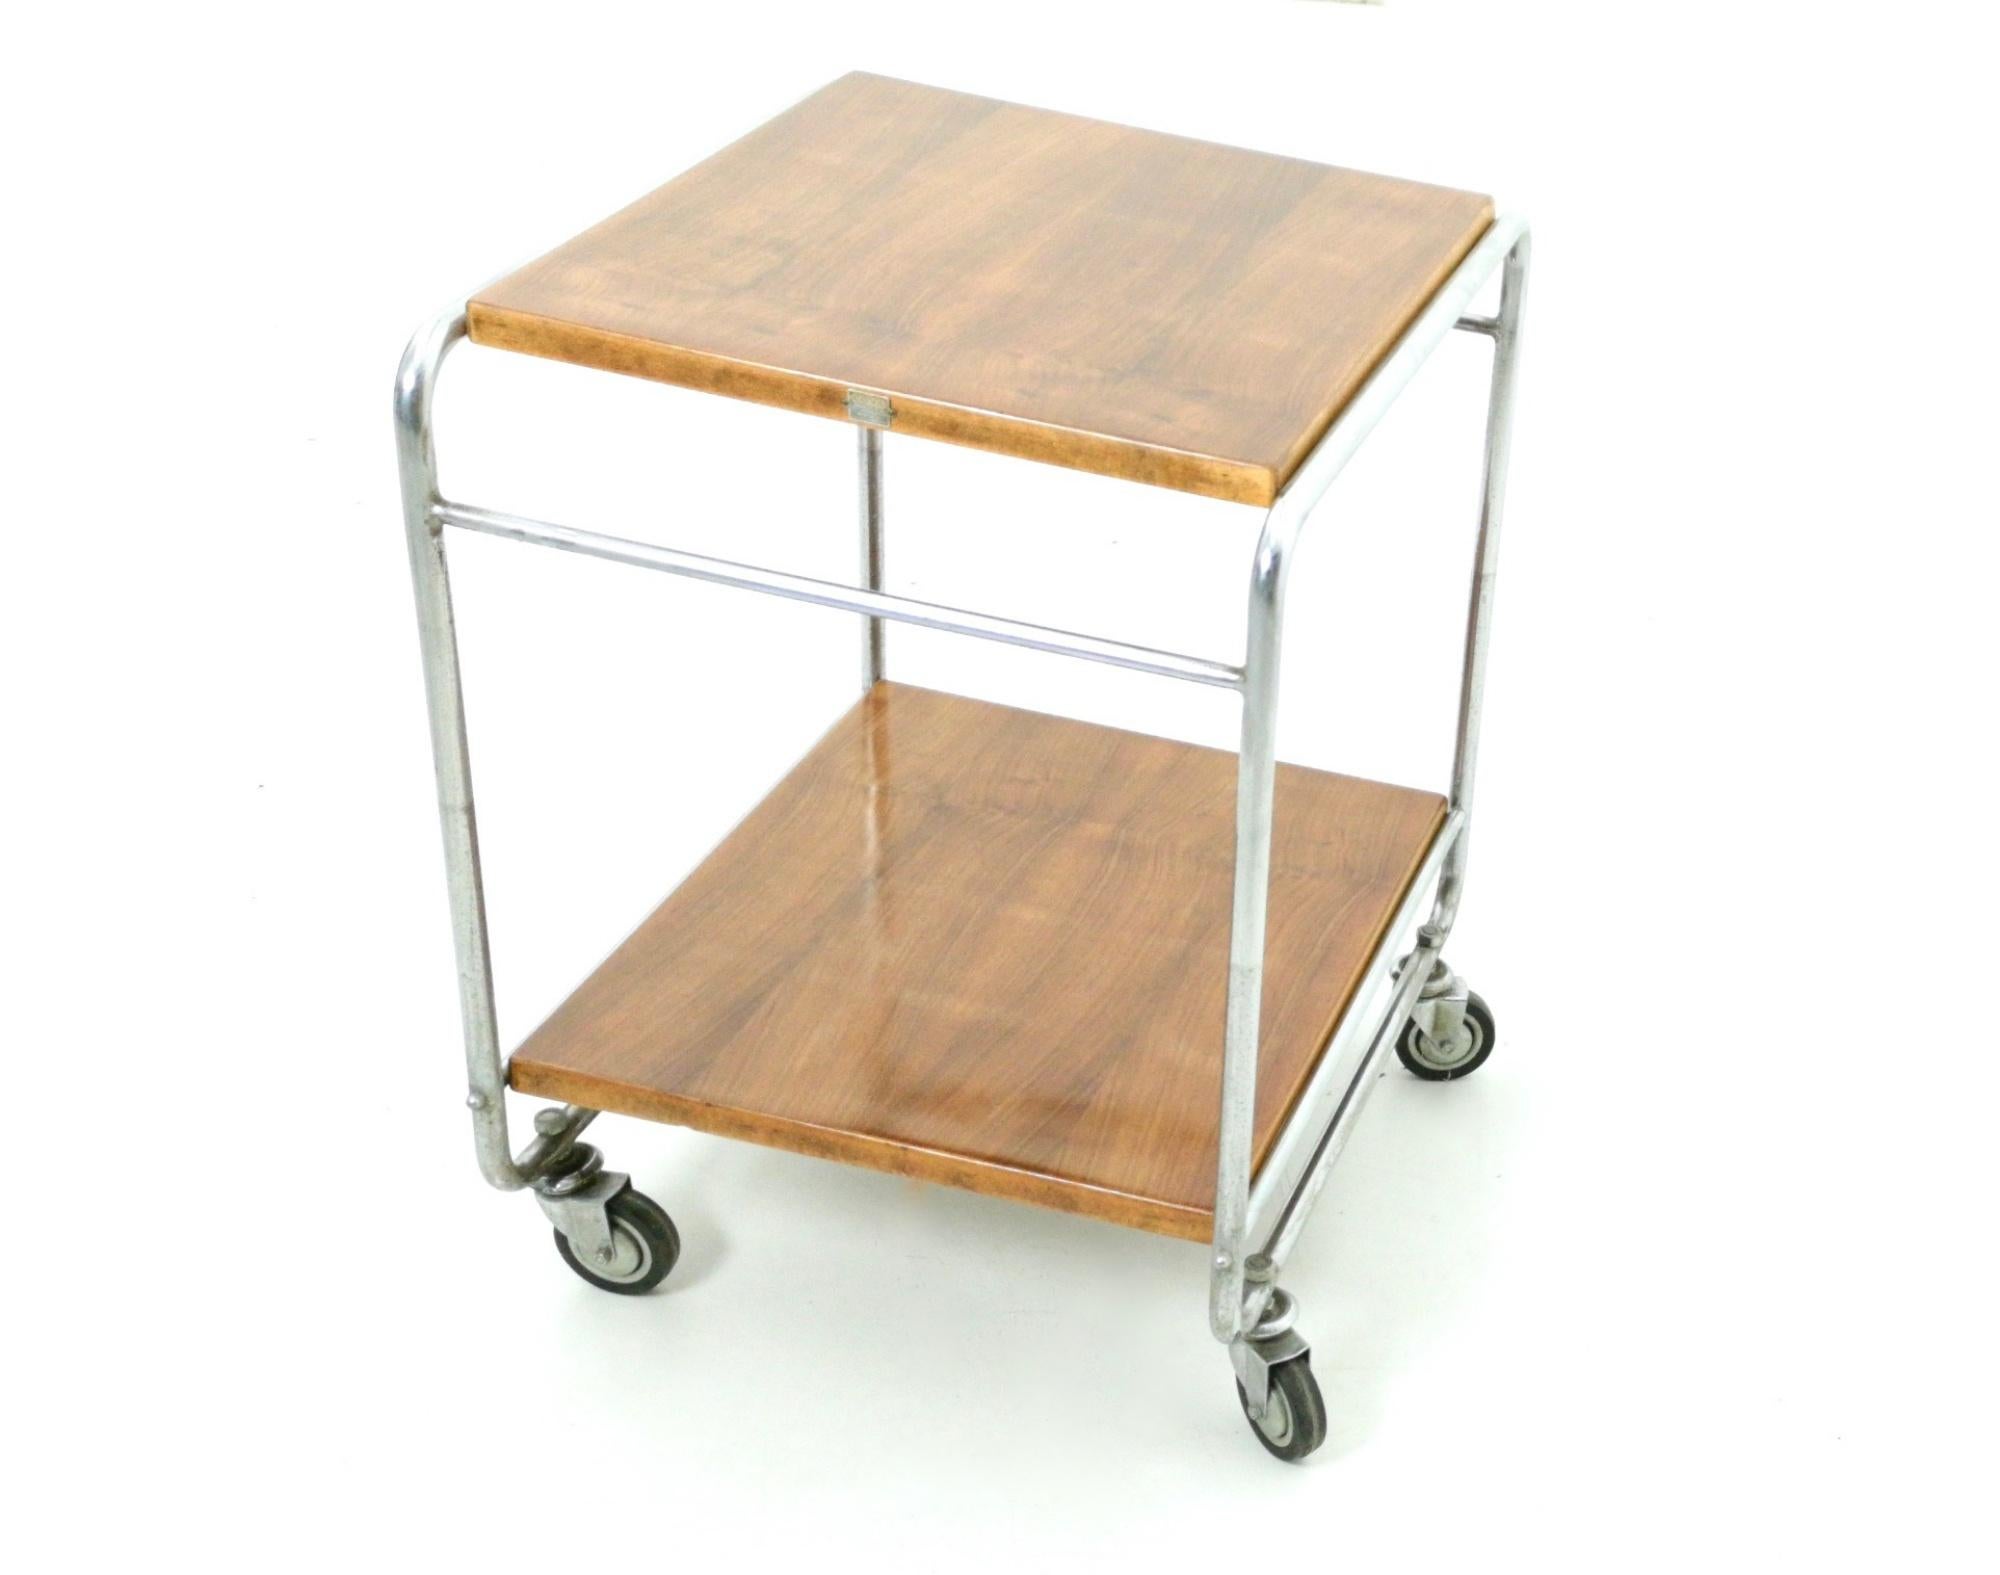 Italian Walnut and Nickel-Plated Metal Serving Cart Produced by Cova, Italy, 1940s